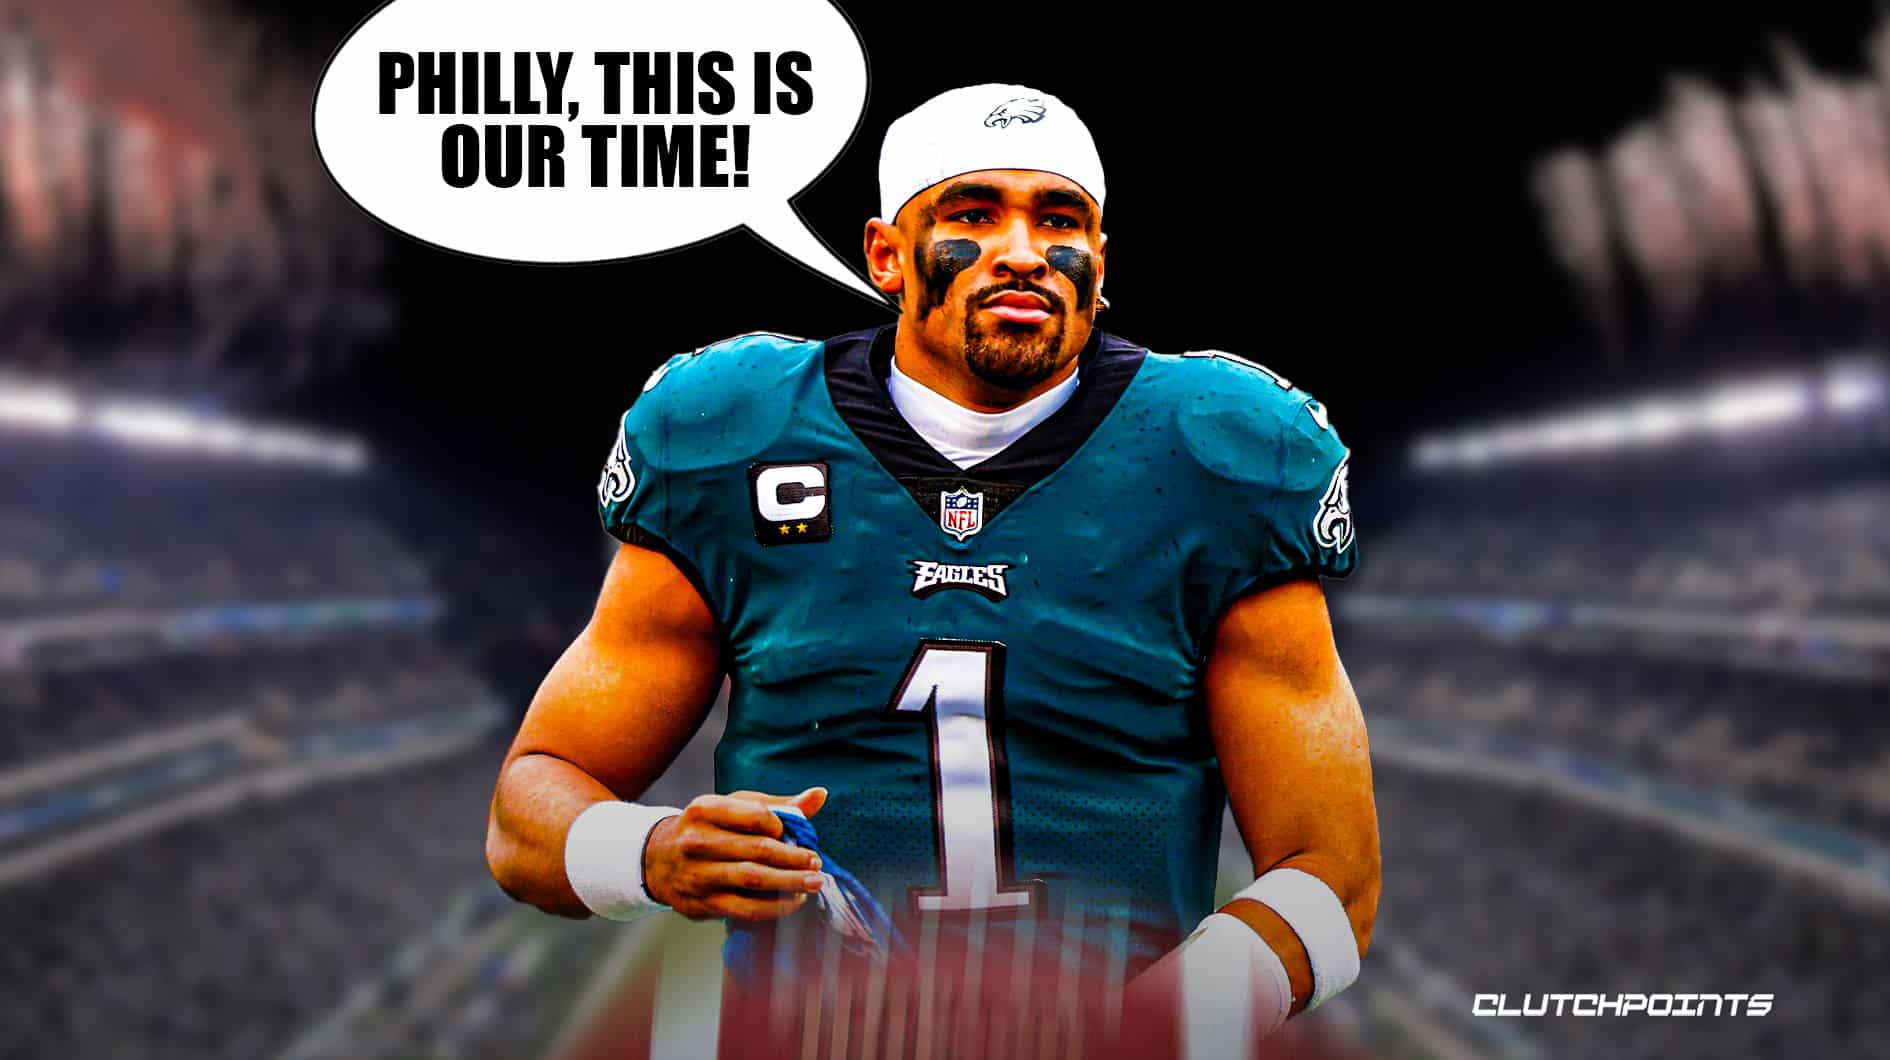 It's a Philly thing: Eagles release hype video saluting fans ahead of  playoff game against rival Giants